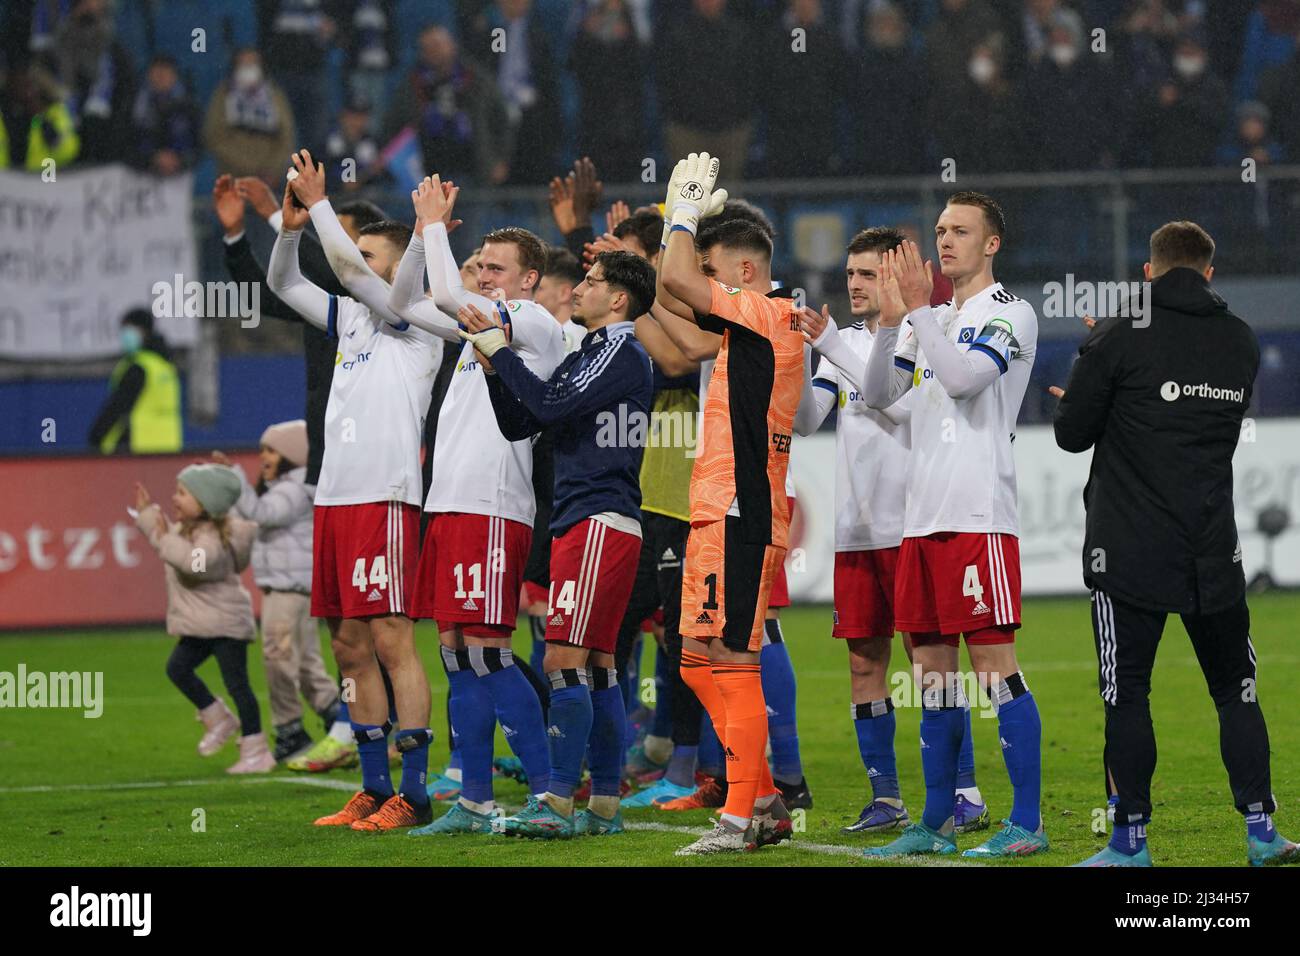 Hamburg, Germany. 05th Apr, 2022. Soccer: 2nd Bundesliga, Matchday 26, Hamburger SV - Erzgebirge Aue, at Volksparkstadion. Hamburg's players cheer their fans after the game. Credit: Marcus Brandt/dpa - IMPORTANT NOTE: In accordance with the requirements of the DFL Deutsche Fußball Liga and the DFB Deutscher Fußball-Bund, it is prohibited to use or have used photographs taken in the stadium and/or of the match in the form of sequence pictures and/or video-like photo series./dpa/Alamy Live News Stock Photo